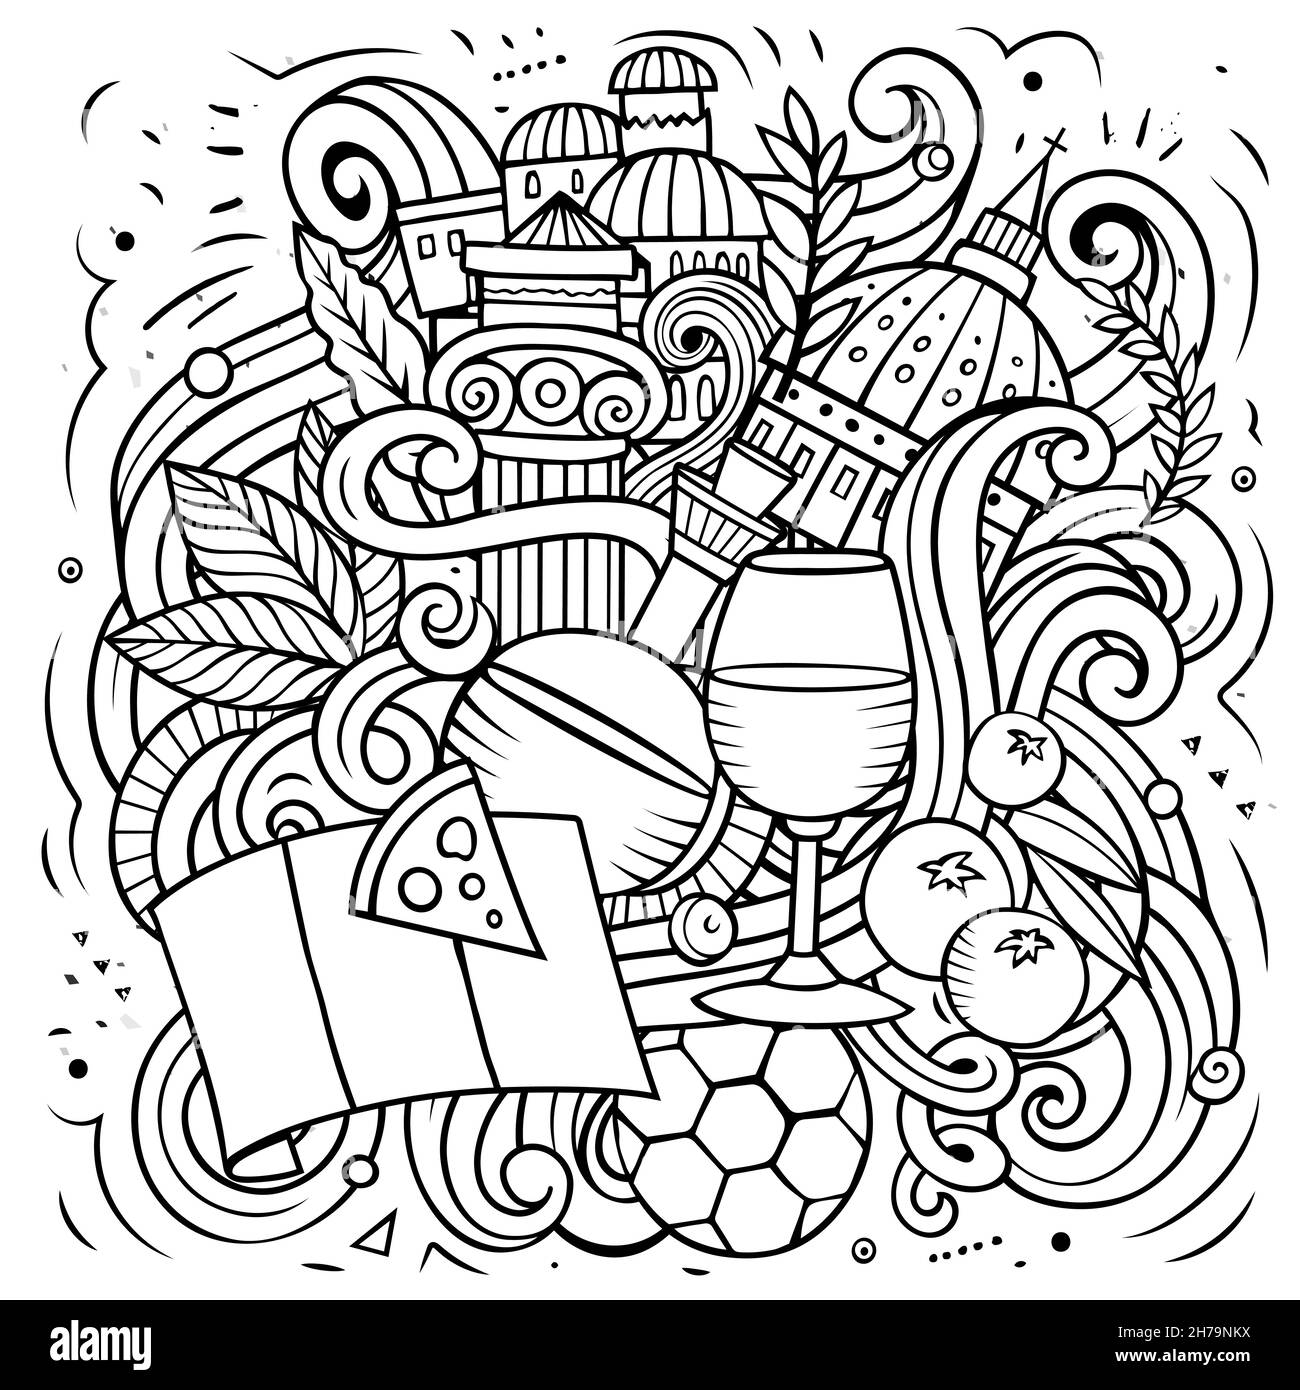 Italy cartoon vector doodle illustration. Sketchy detailed composition with lot of Italian objects and symbols Stock Vector